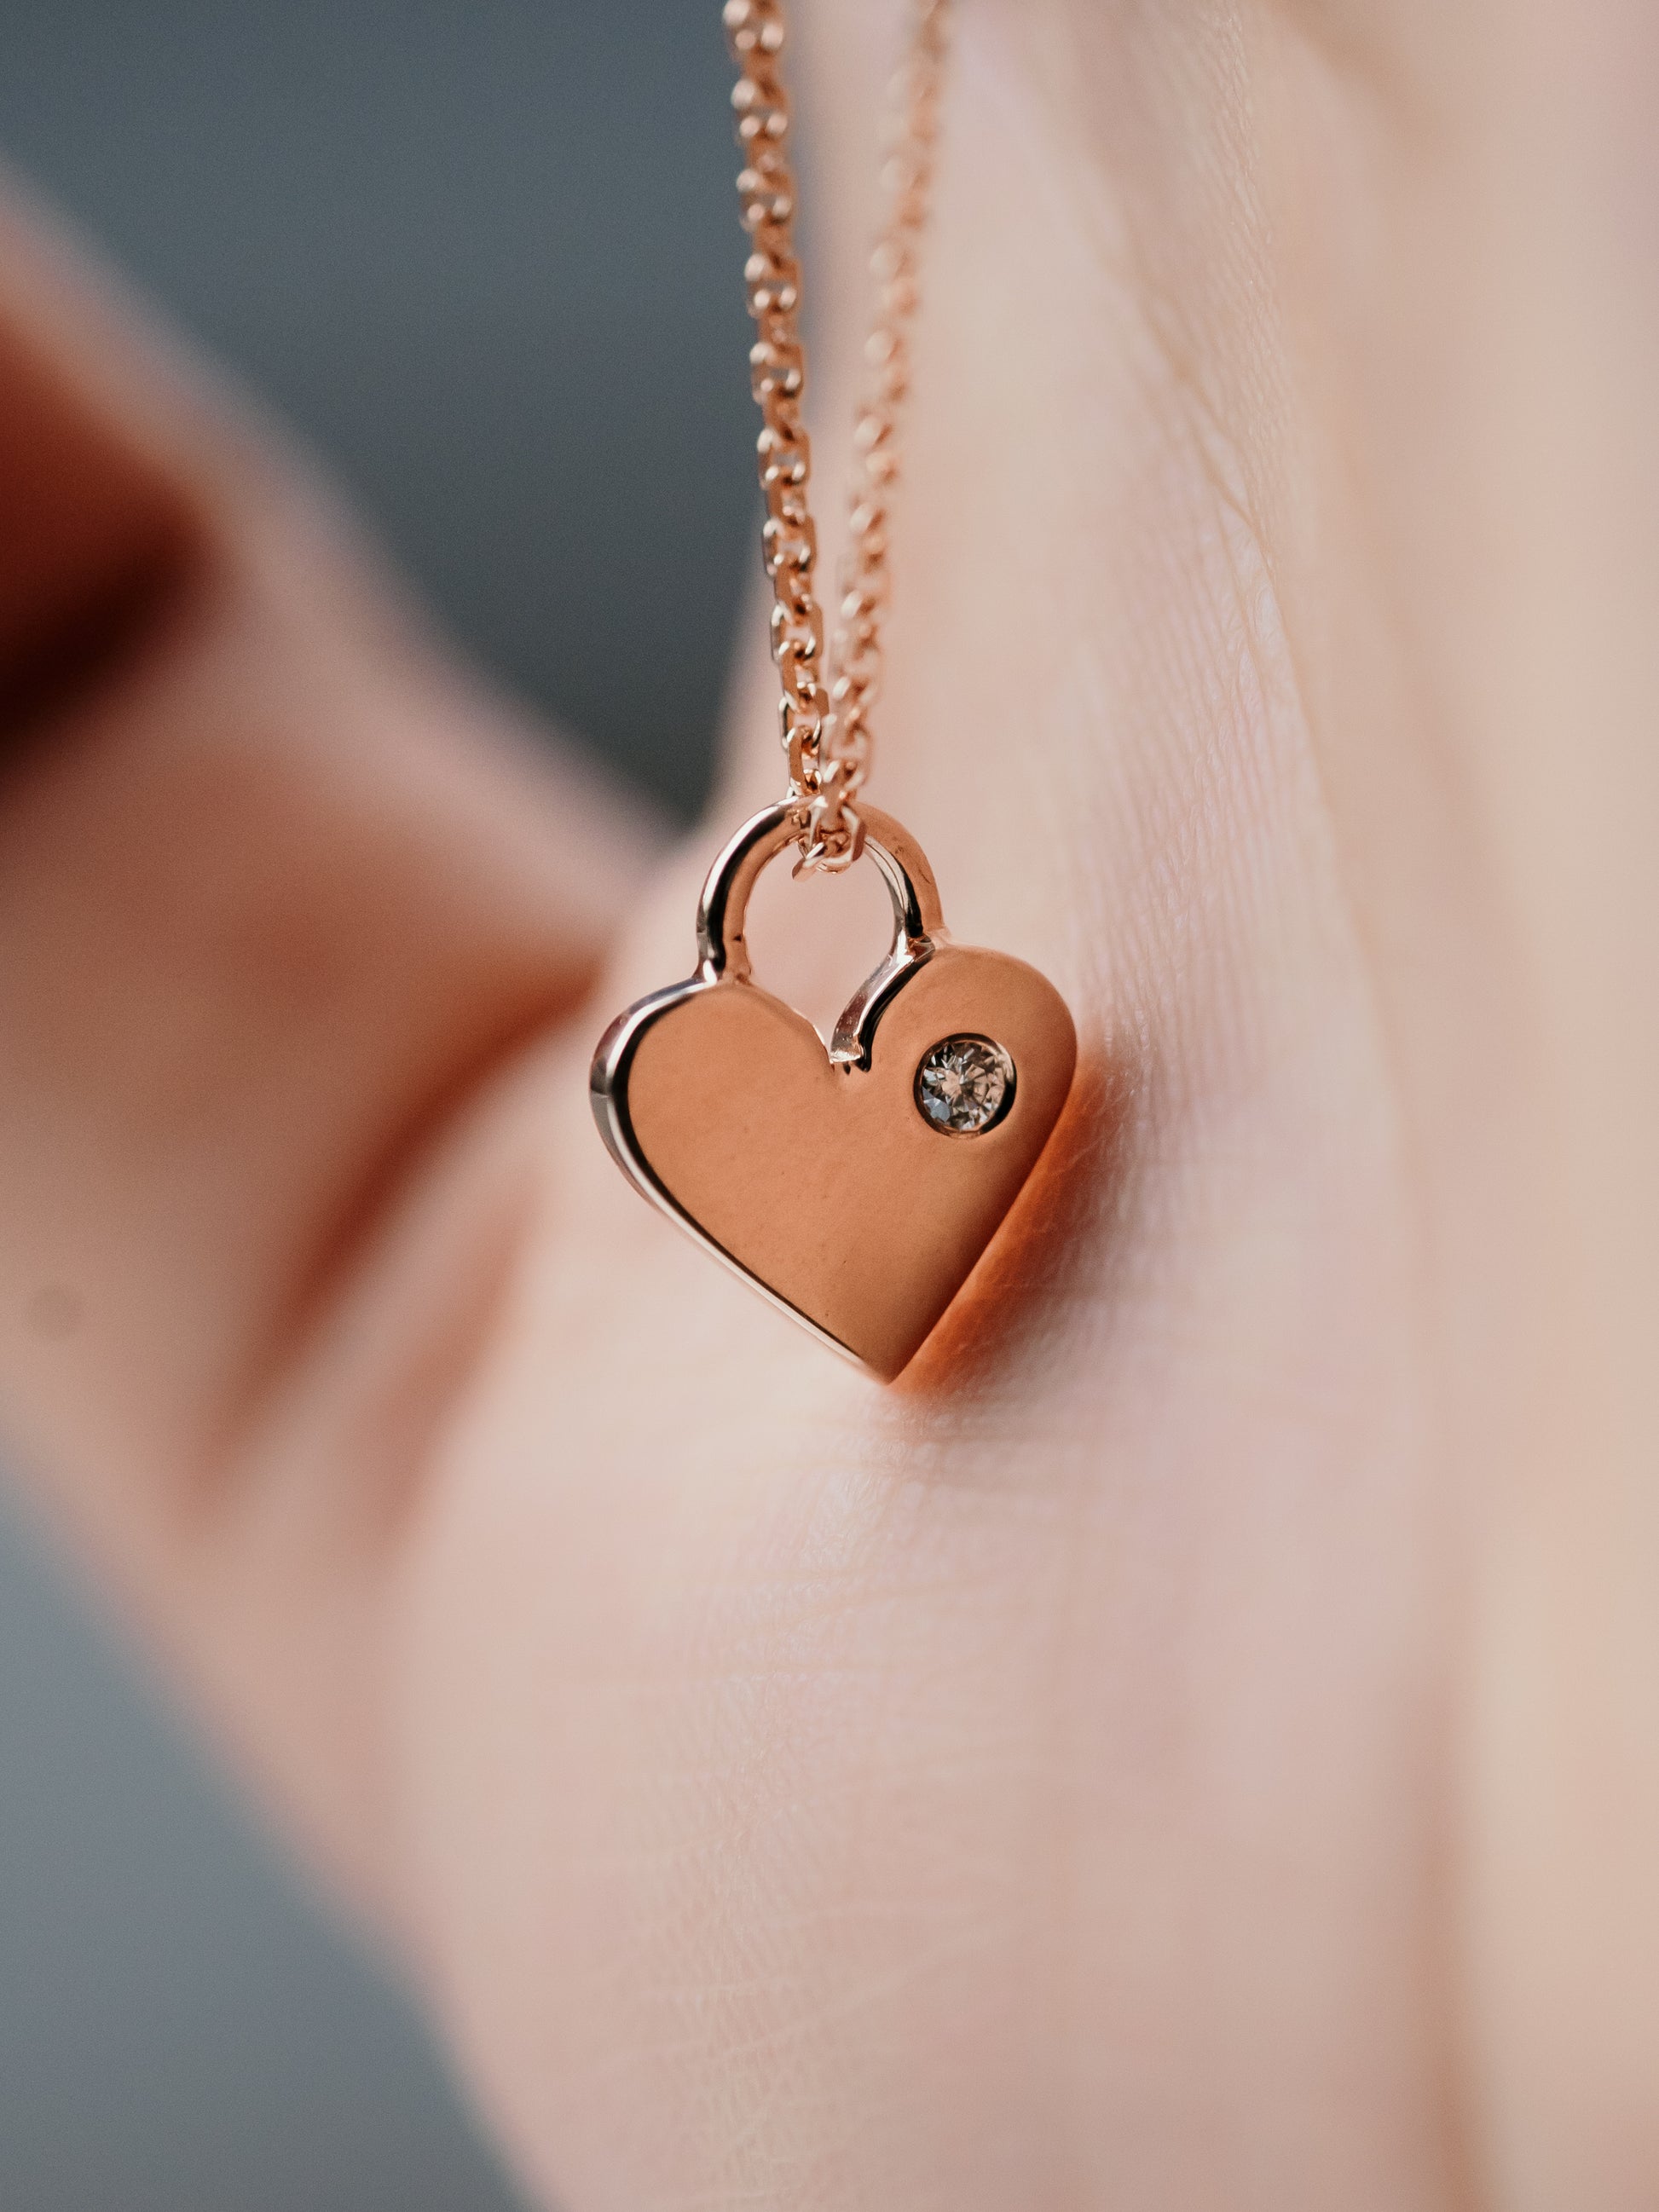 mothers day gift necklace heart shaped